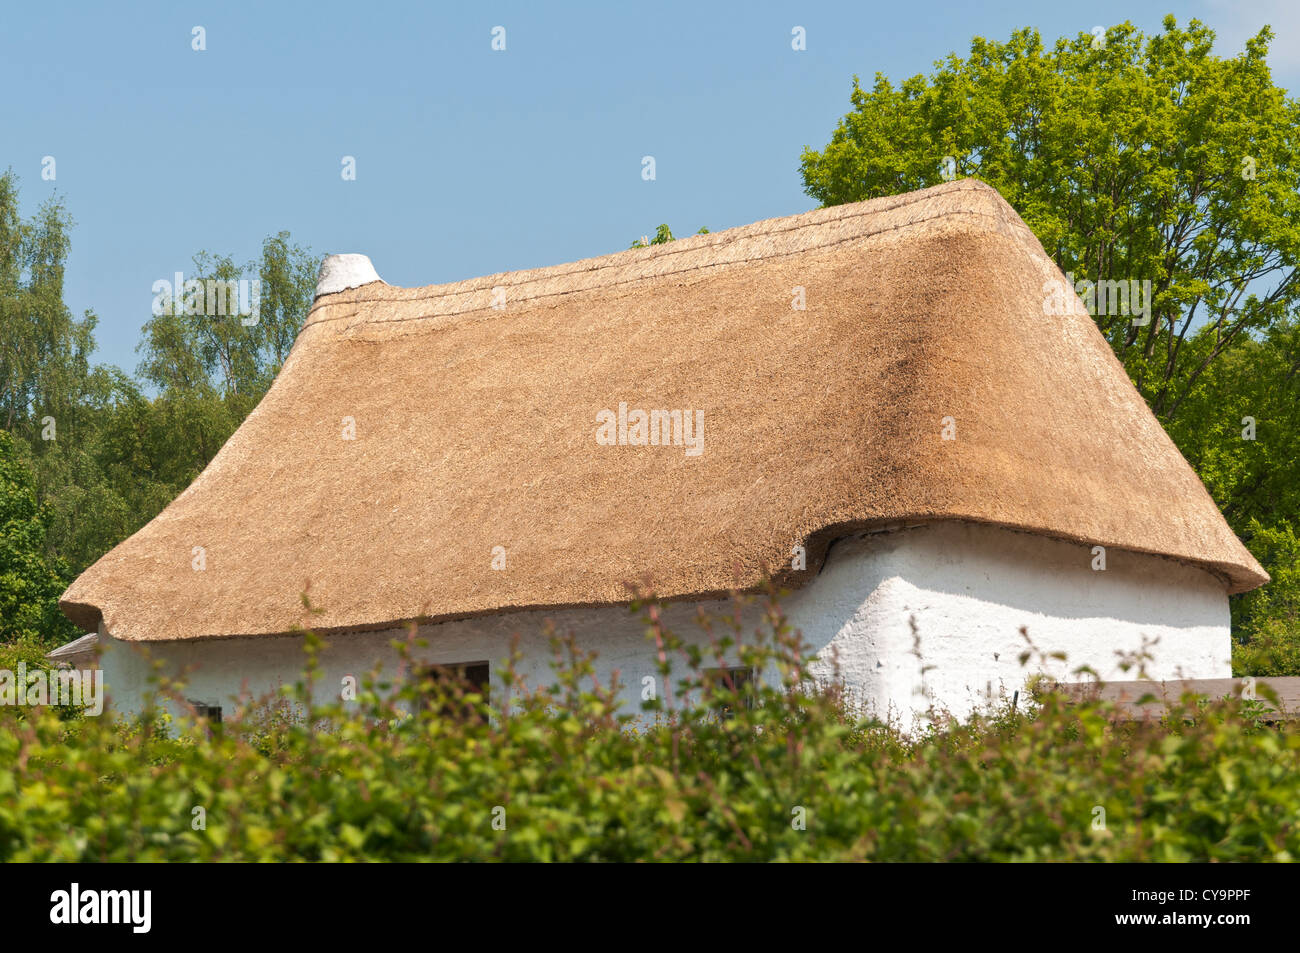 Wales, St. Fagans National History Museum, thatched roof farm house Stock Photo